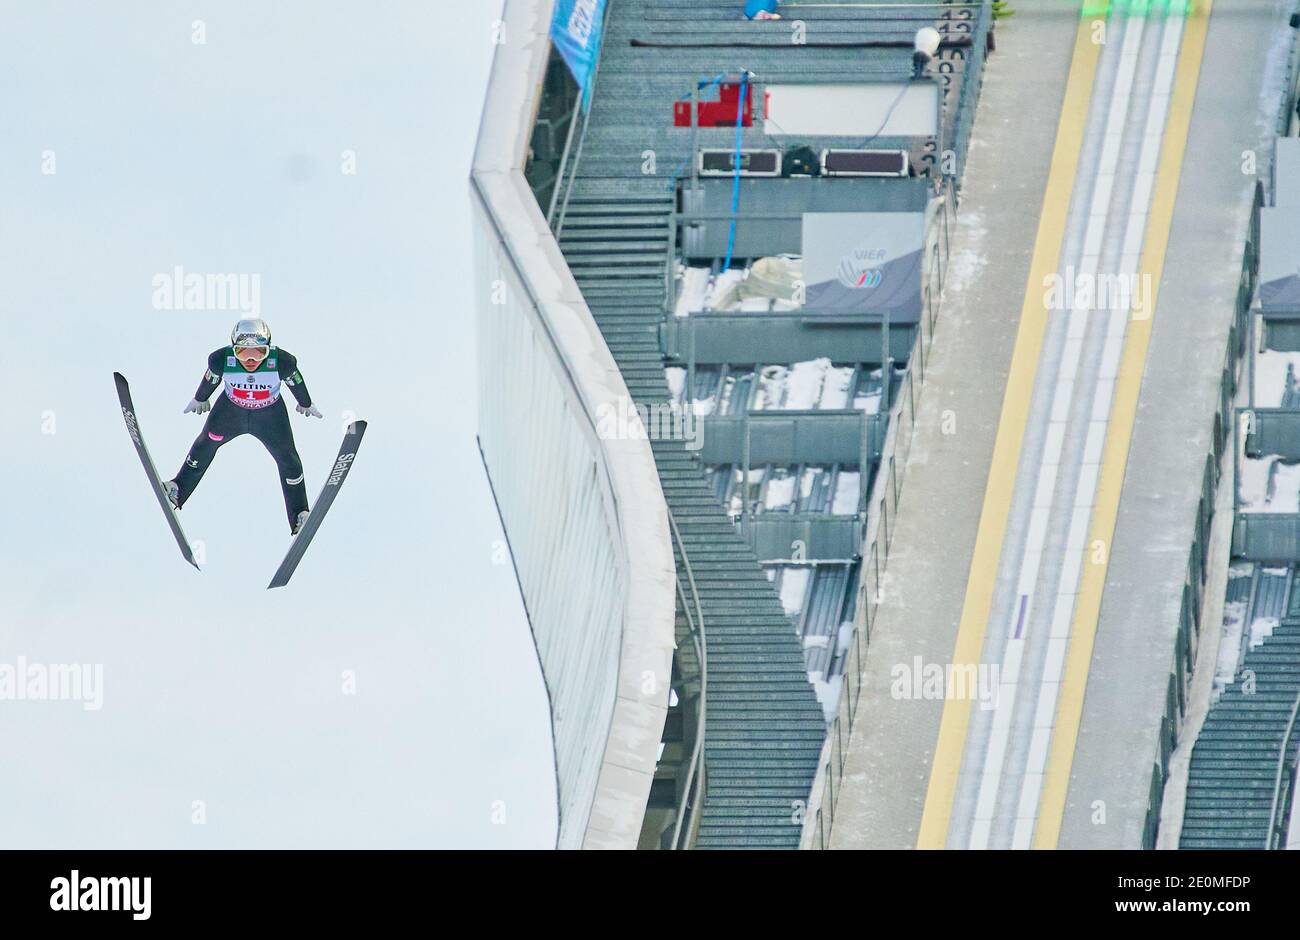 Anze LANISEk, SLO in action at the Four Hills Tournament Ski Jumping at Olympic Stadium, Grosse Olympiaschanze in Garmisch-Partenkirchen, Bavaria, Germany, January 01, 2021.  © Peter Schatz / Alamy Live News Stock Photo